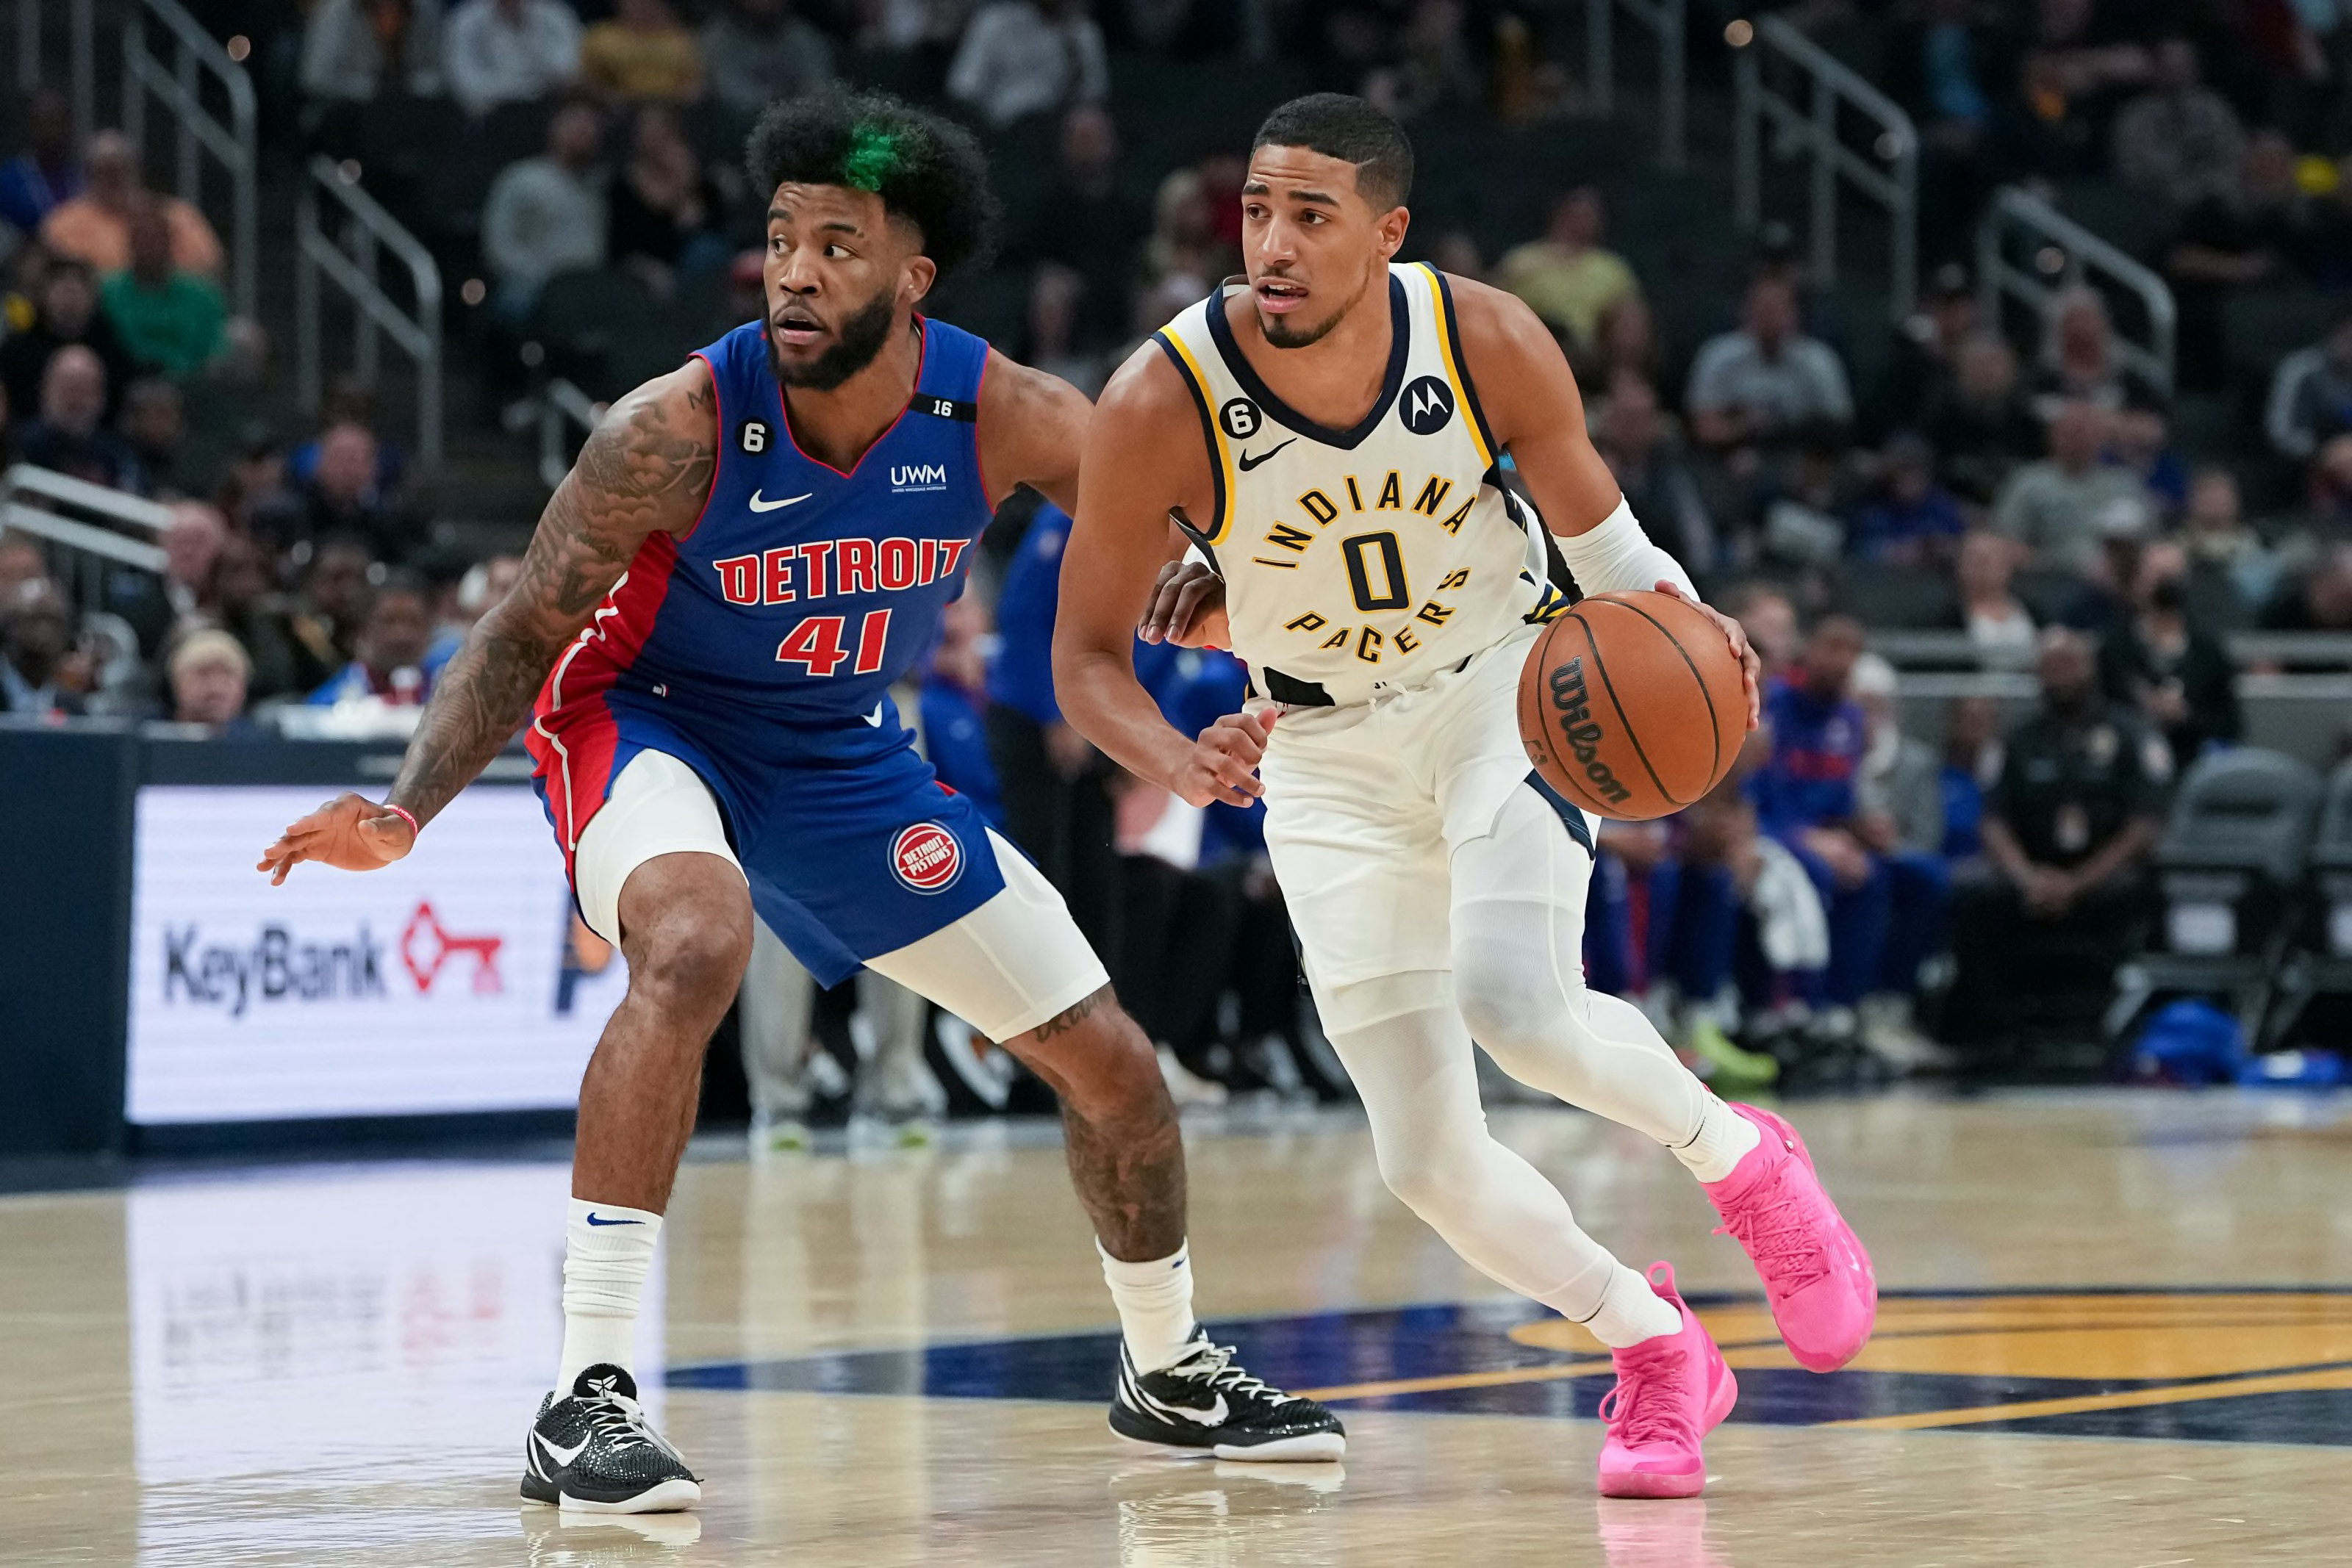 Indiana Pacers vs. Detroit Pistons: Season opener preview